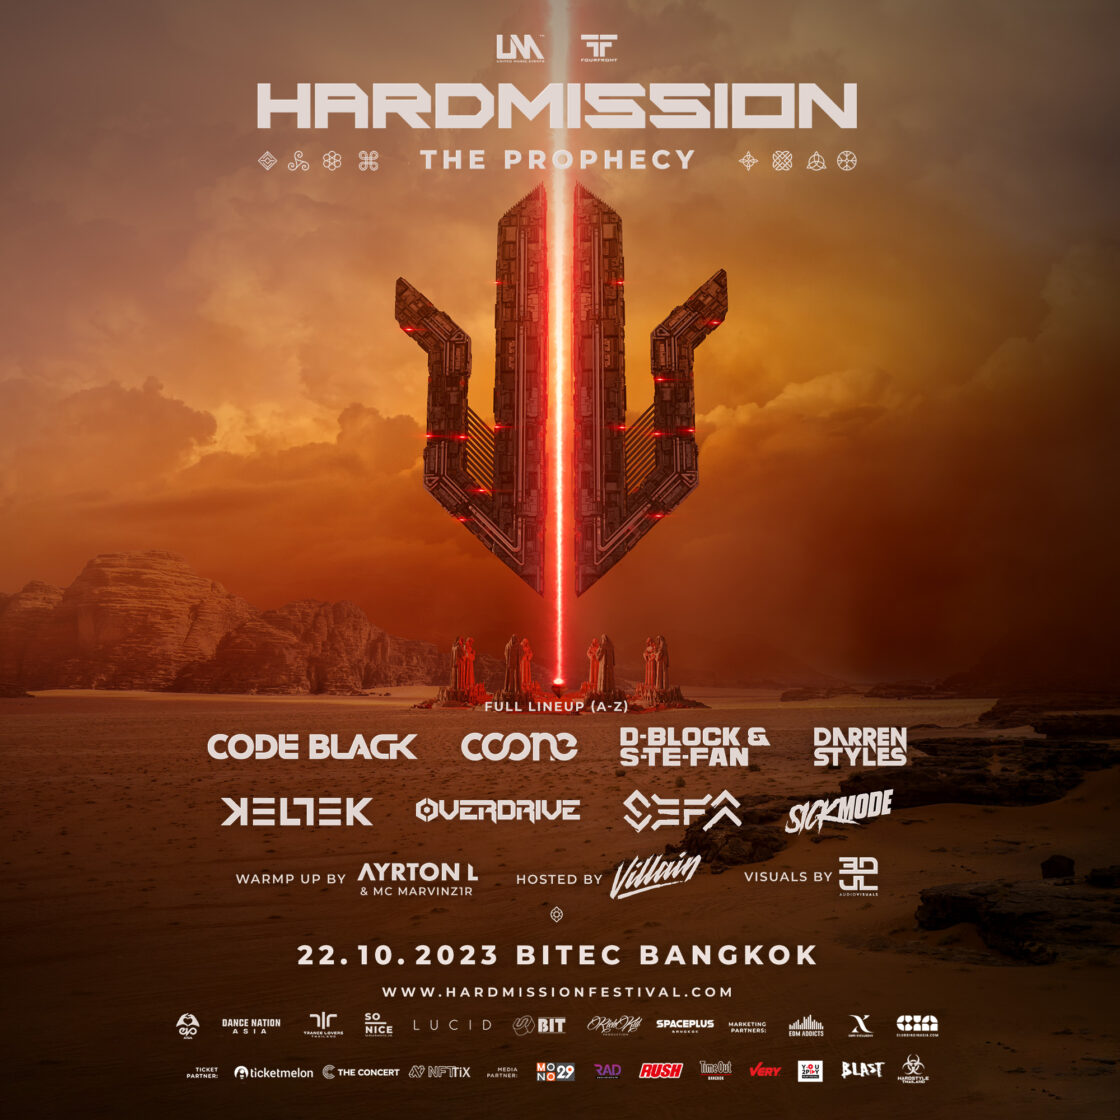 Hardmission: The Prophecy